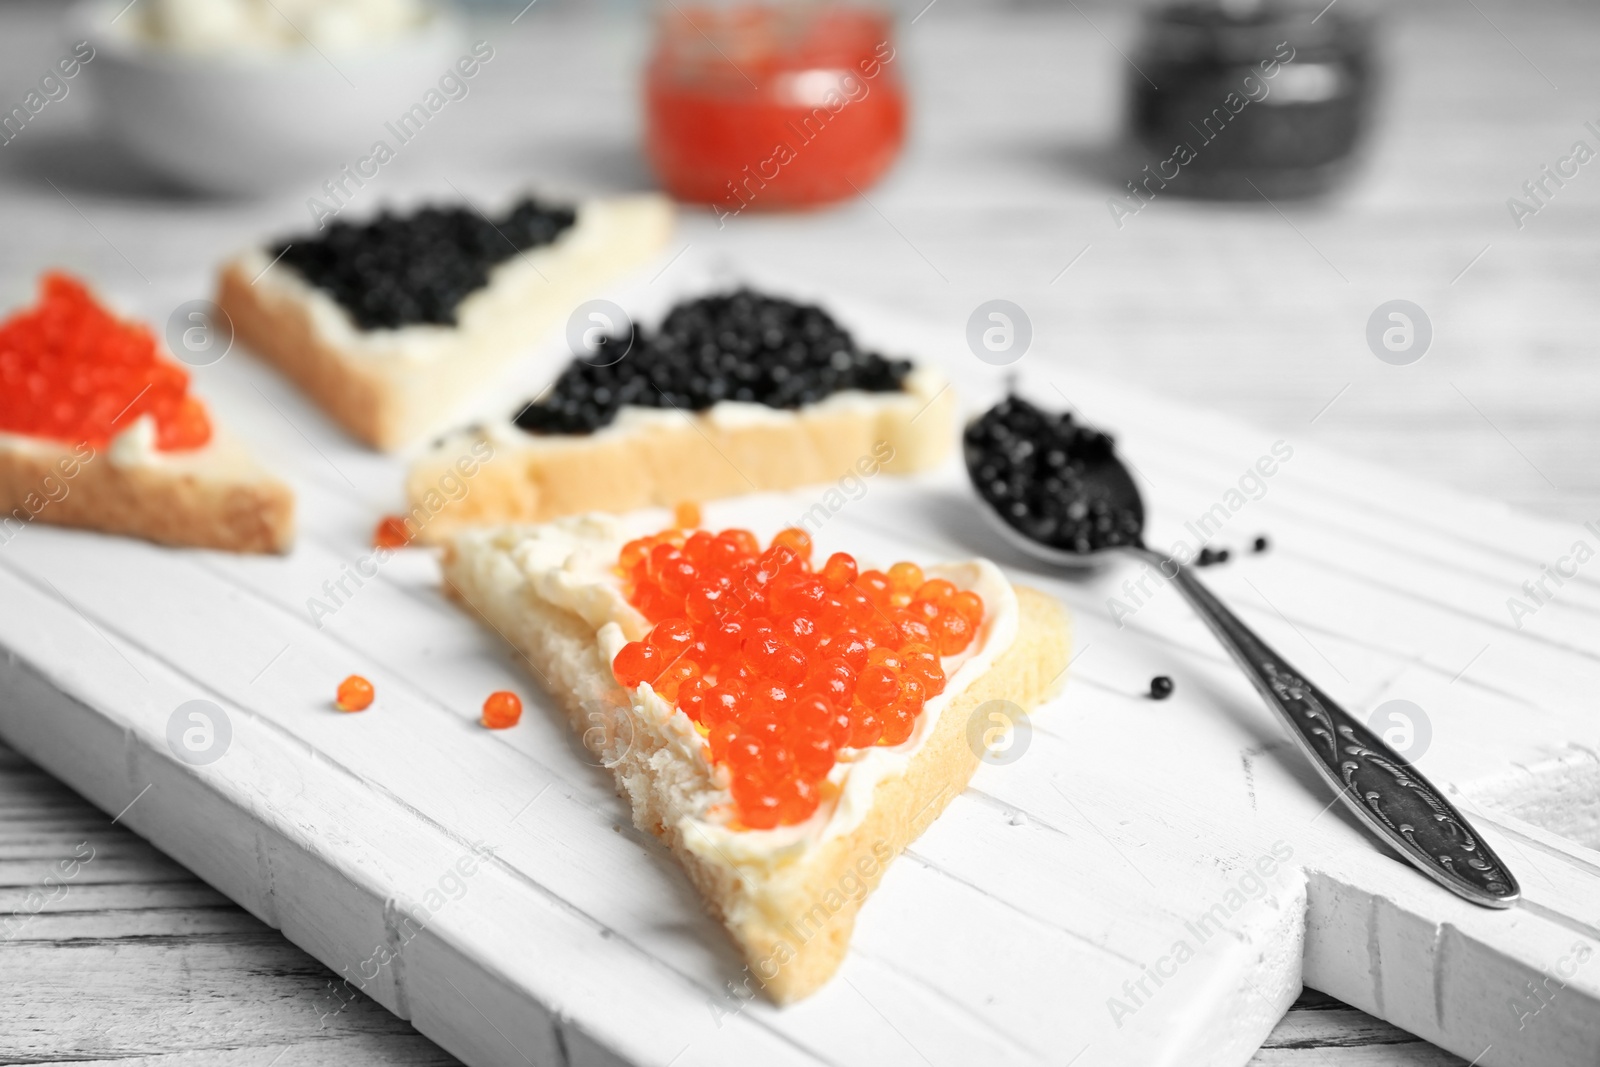 Photo of Sandwiches with black and red caviar on wooden board